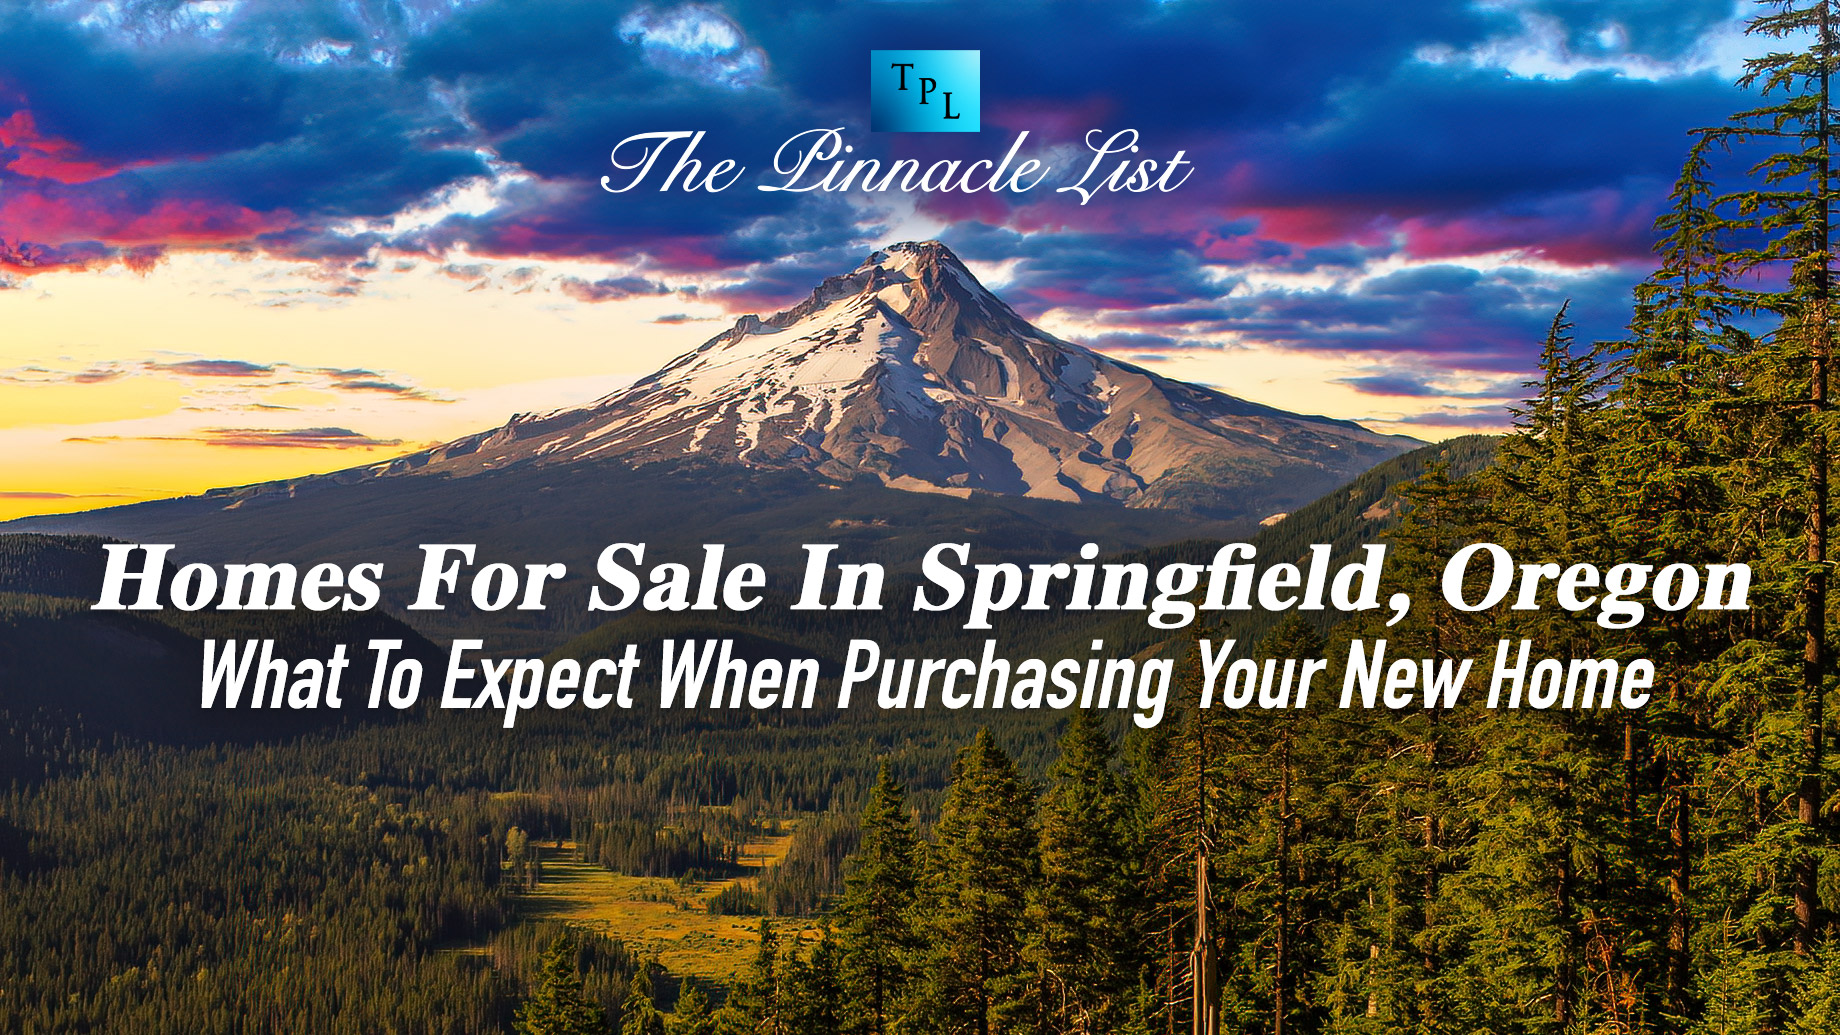 Homes For Sale In Springfield, Oregon - What To Expect When Purchasing Your New Home